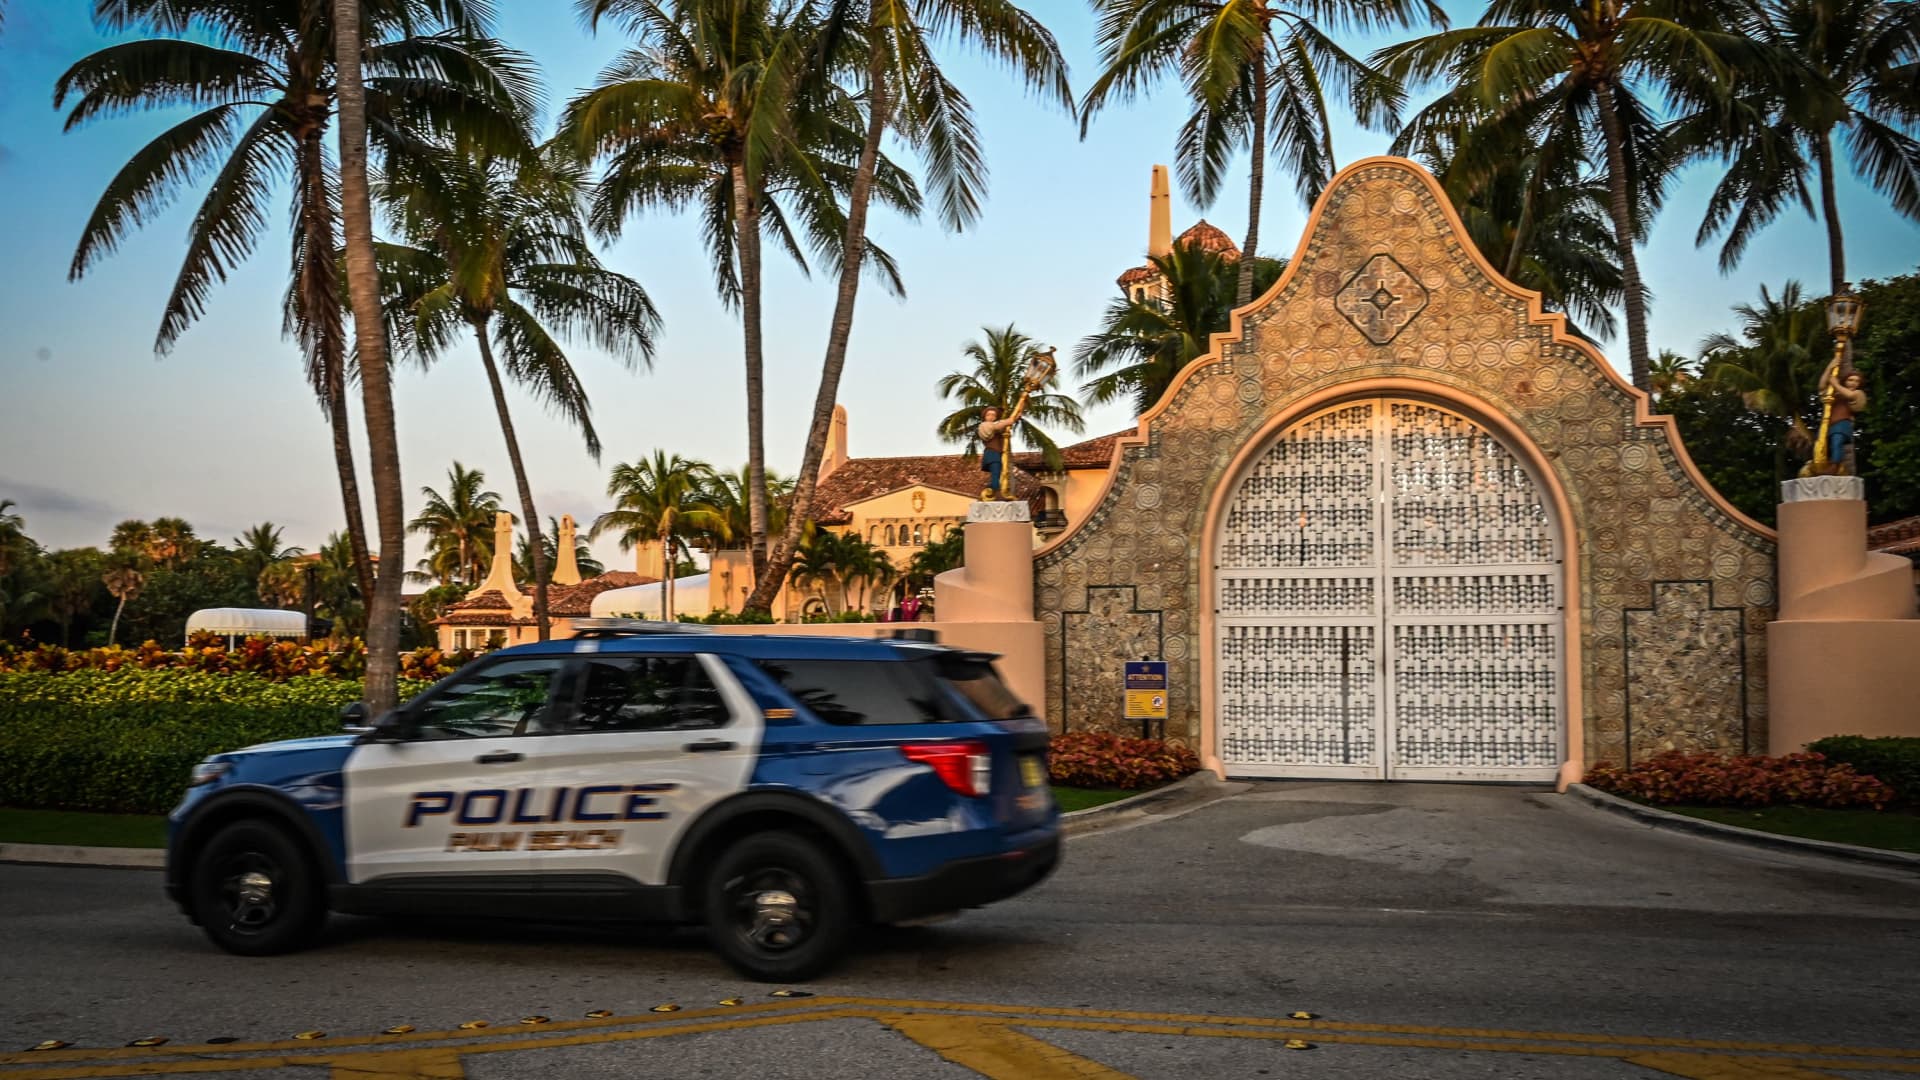 A police car is parked outside the Mar-a-Lago Club, home of former US President Donald Trump, on April 3, 2023 in Palm Beach, Florida.